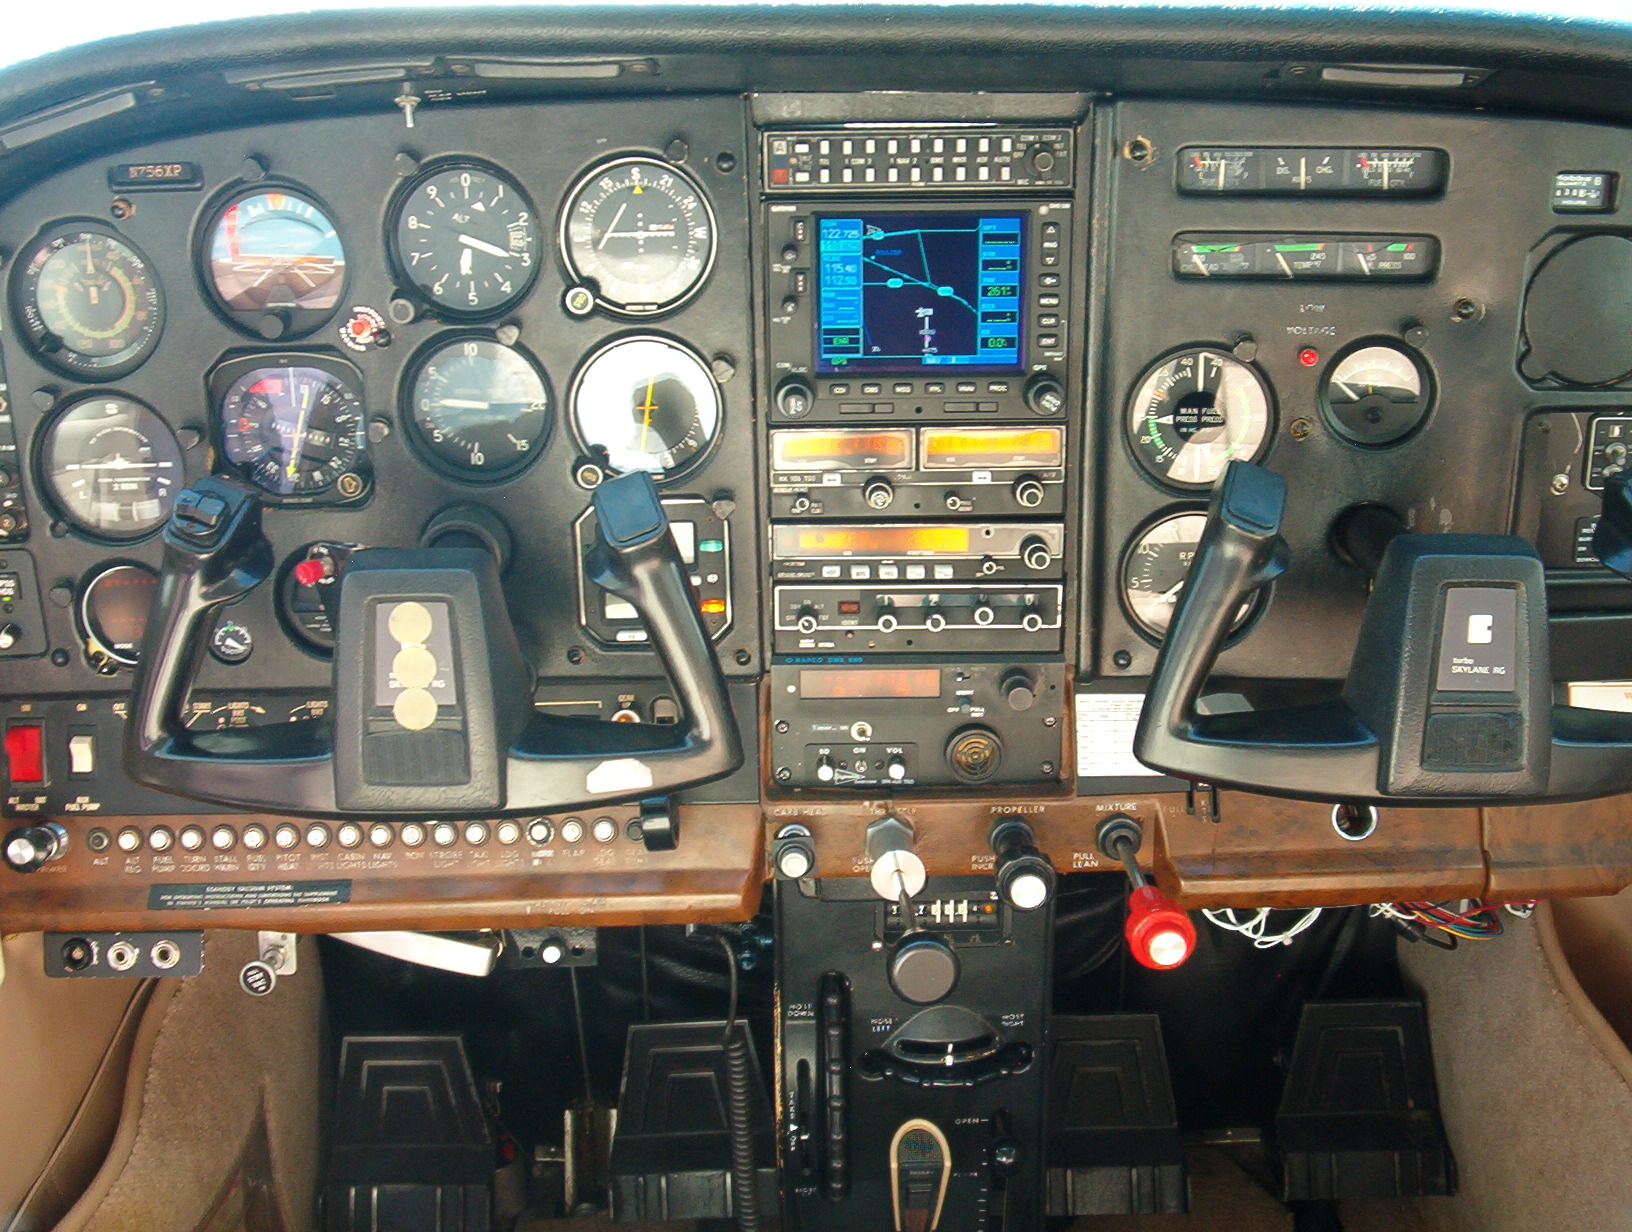 TR182 N756XP aircraft for rent at Specialty Flight Training, Inc Learn to Fly Boulder, CO